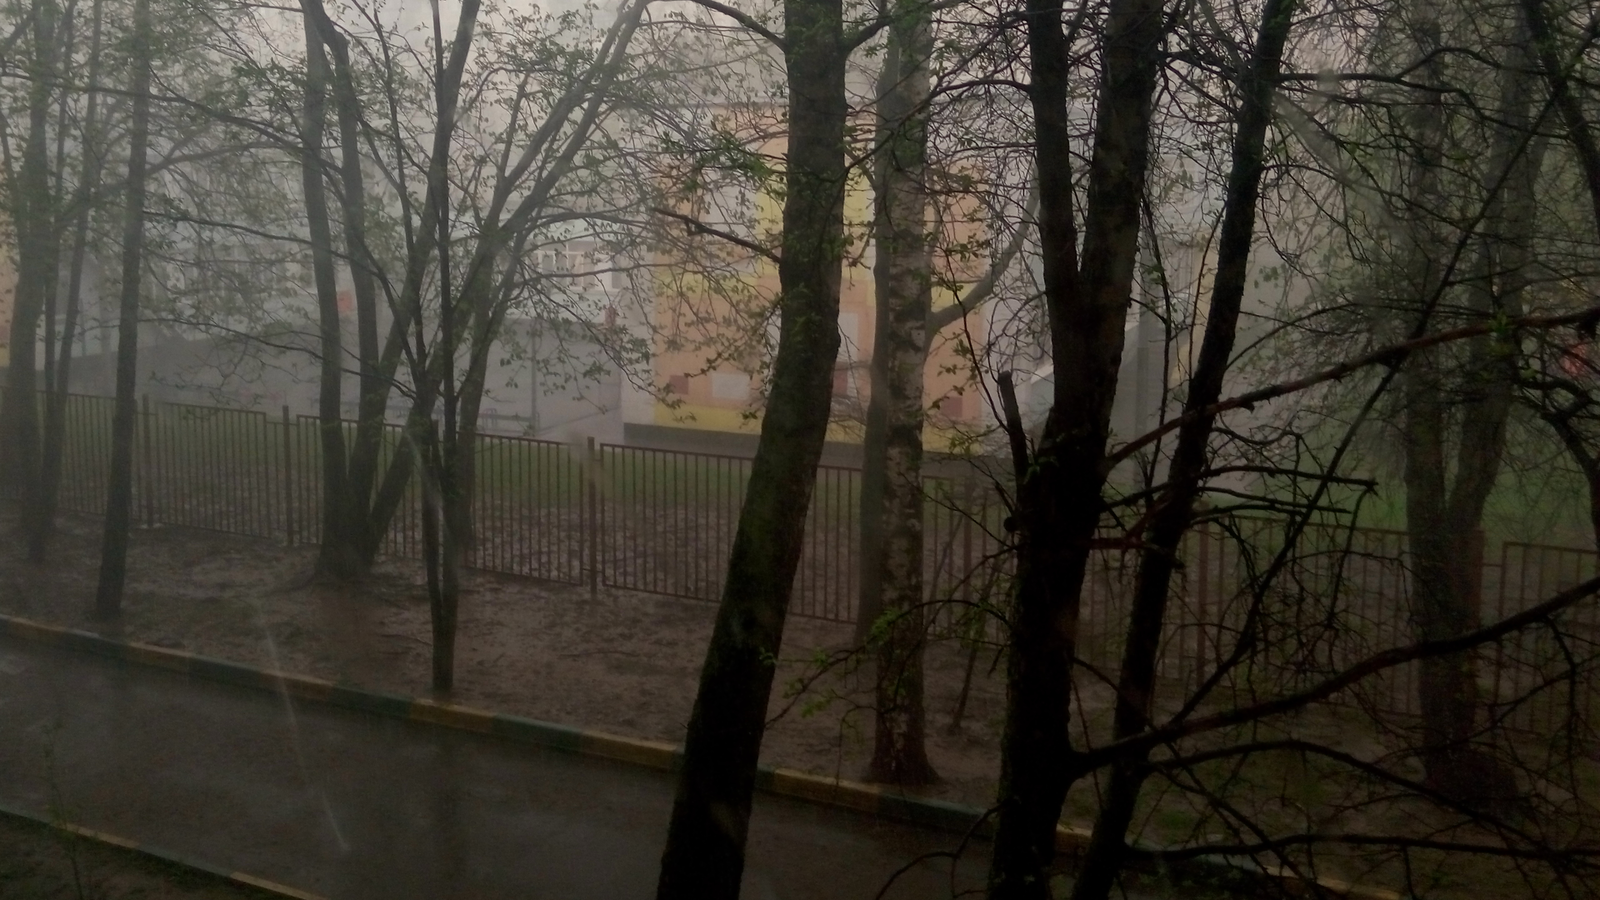 About the weather (view from my window) - My, Weather, Moscow, 2018, Moment, Seasons, Spring, Autumn